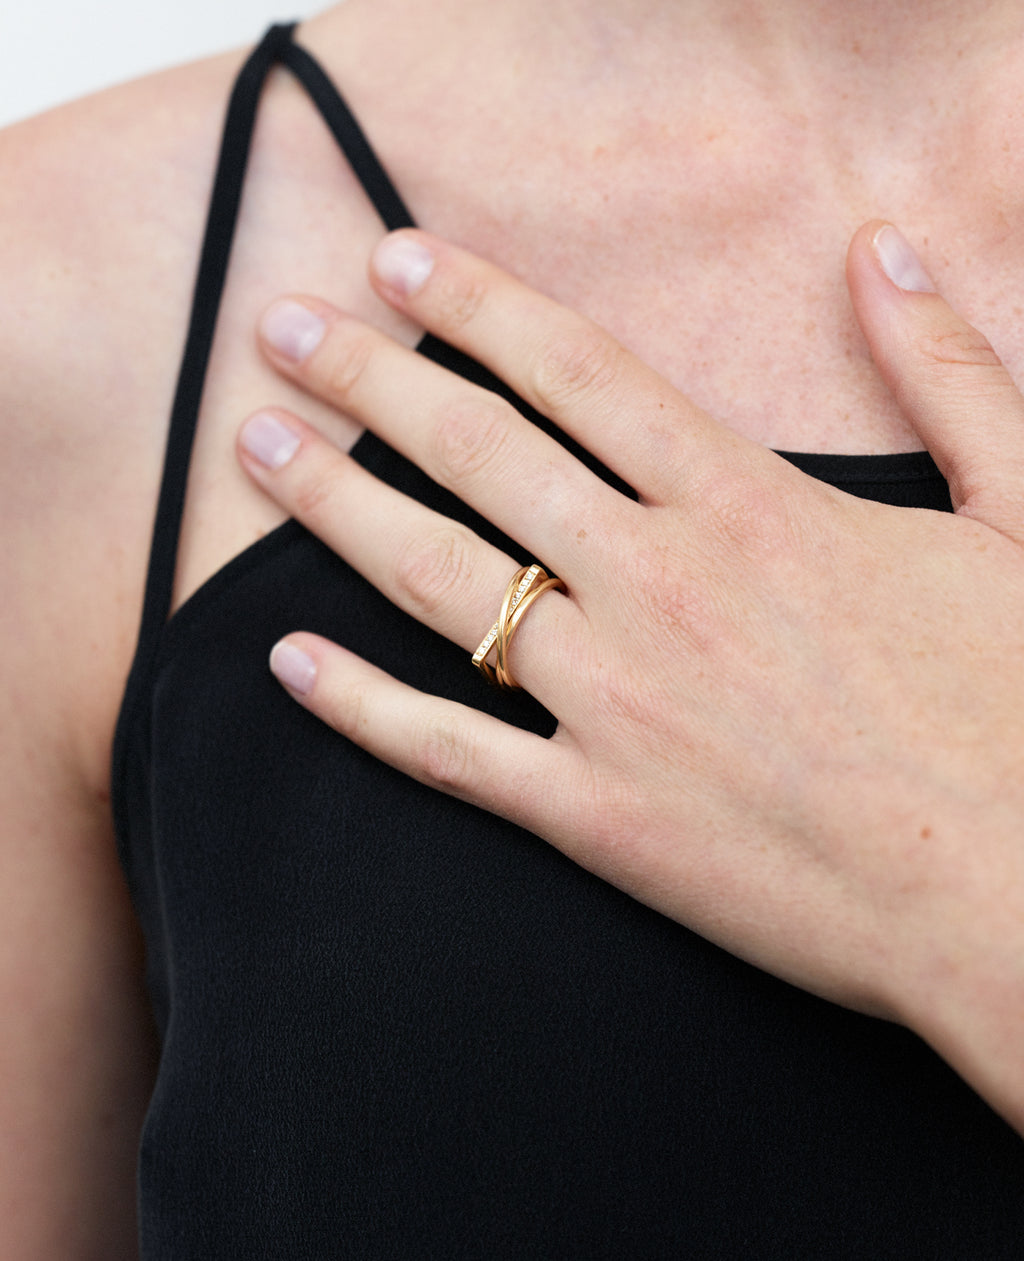 18KT yellow and rose gold ring with diamonds worn by a female hand - Quadrato Cerchio Cerchio